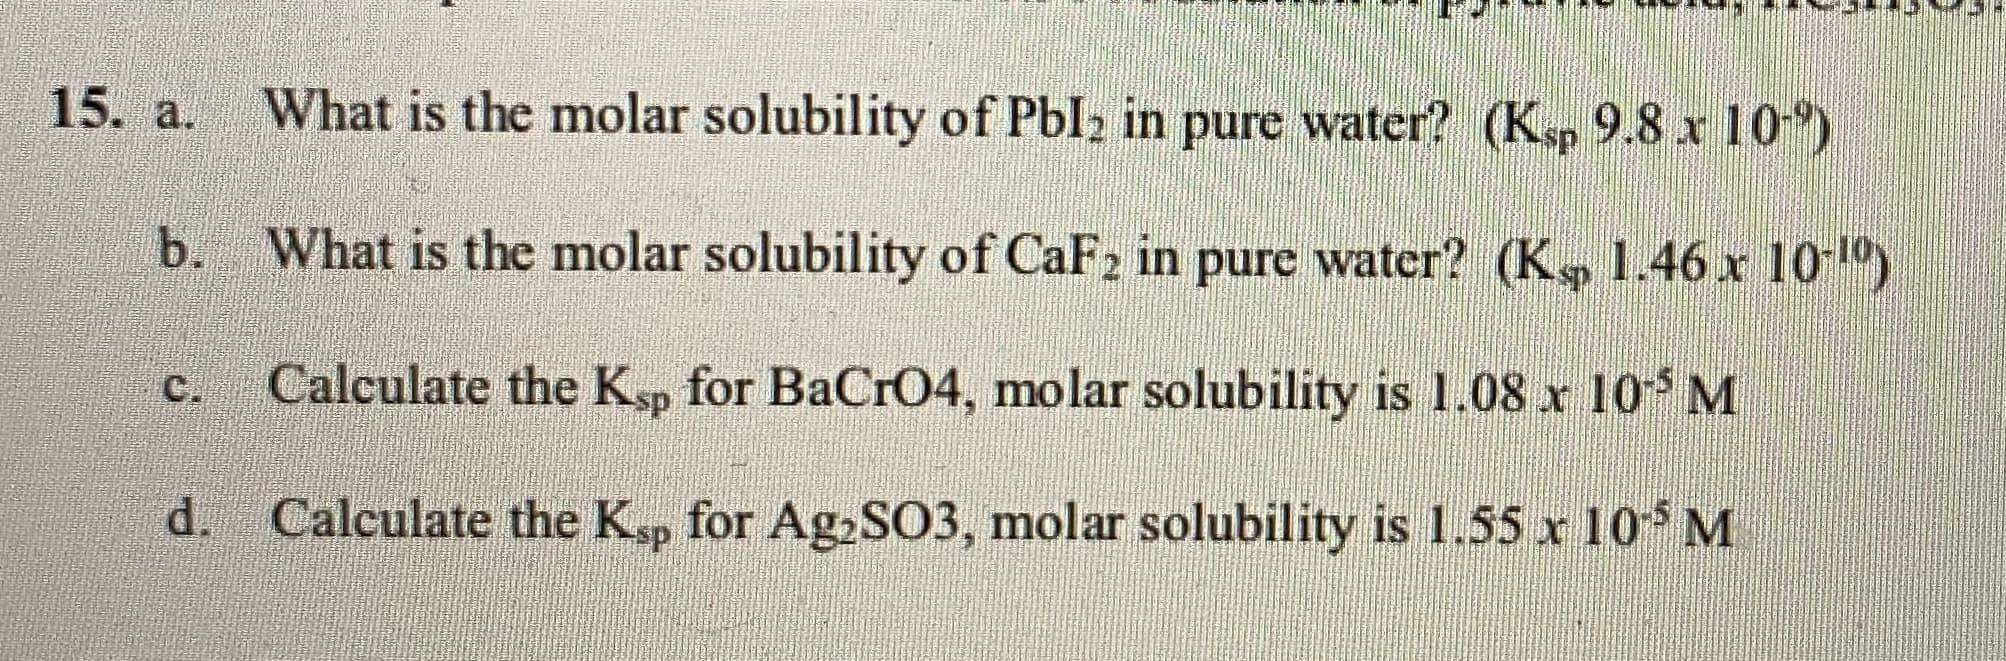 What is the molar solubility of Pbl2 in pure water? (Ksp 9.8 x 10)
What is the molar solubility of CaF2 in pure water? (K 1.46 x 10)
Calculate the K, for BaCrO4, molar solubility is 1.08 x 10 M
